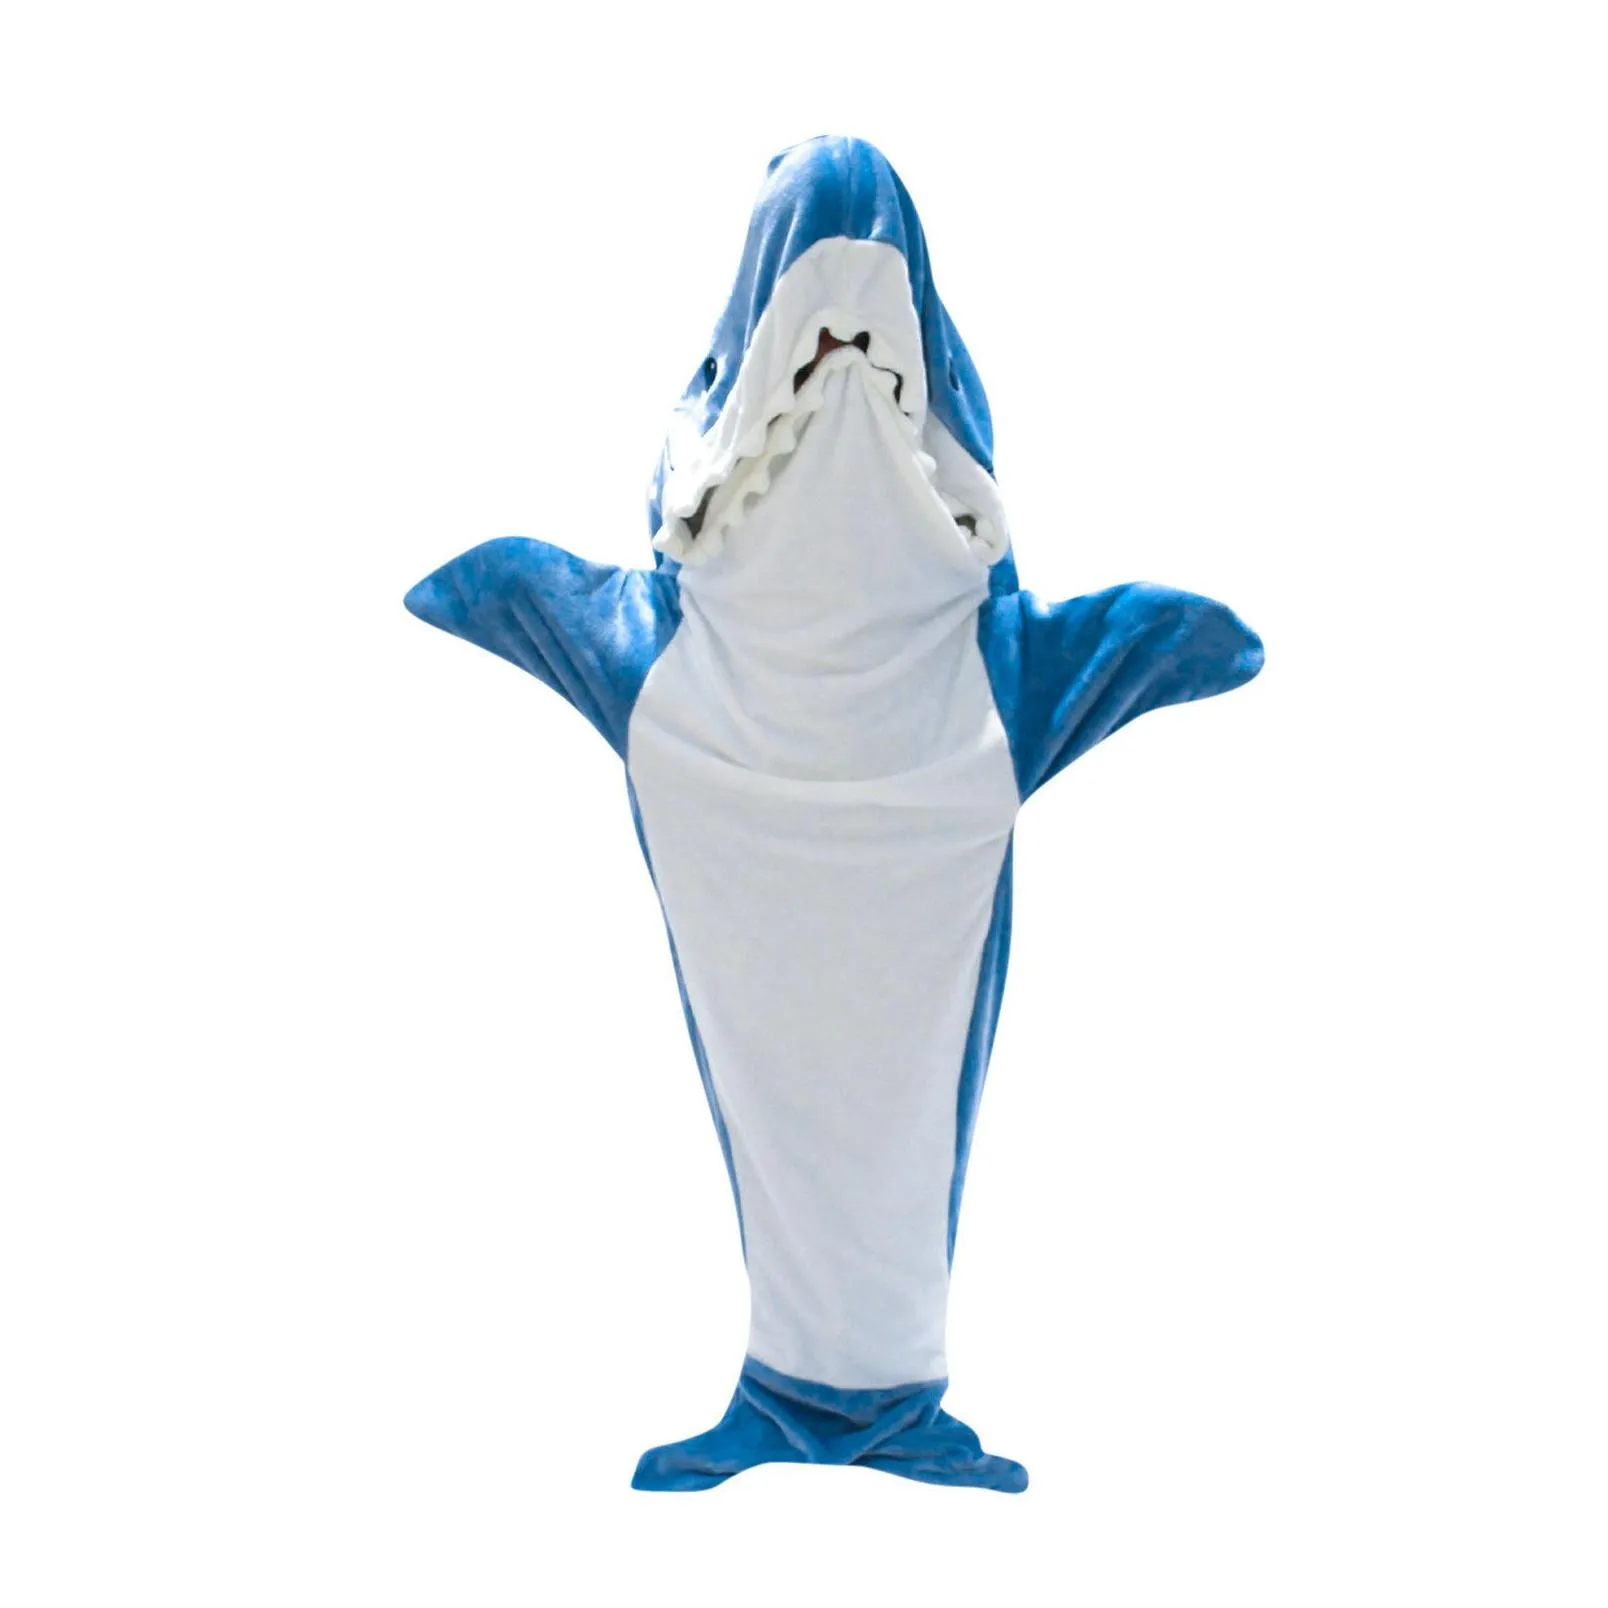 Blankets Blankets Soft Warm Shark Blanket For Adts With Hooded Design And Loose Jumpsuit 230809 Drop Delivery Home Garden Home Textile Dh6Sg